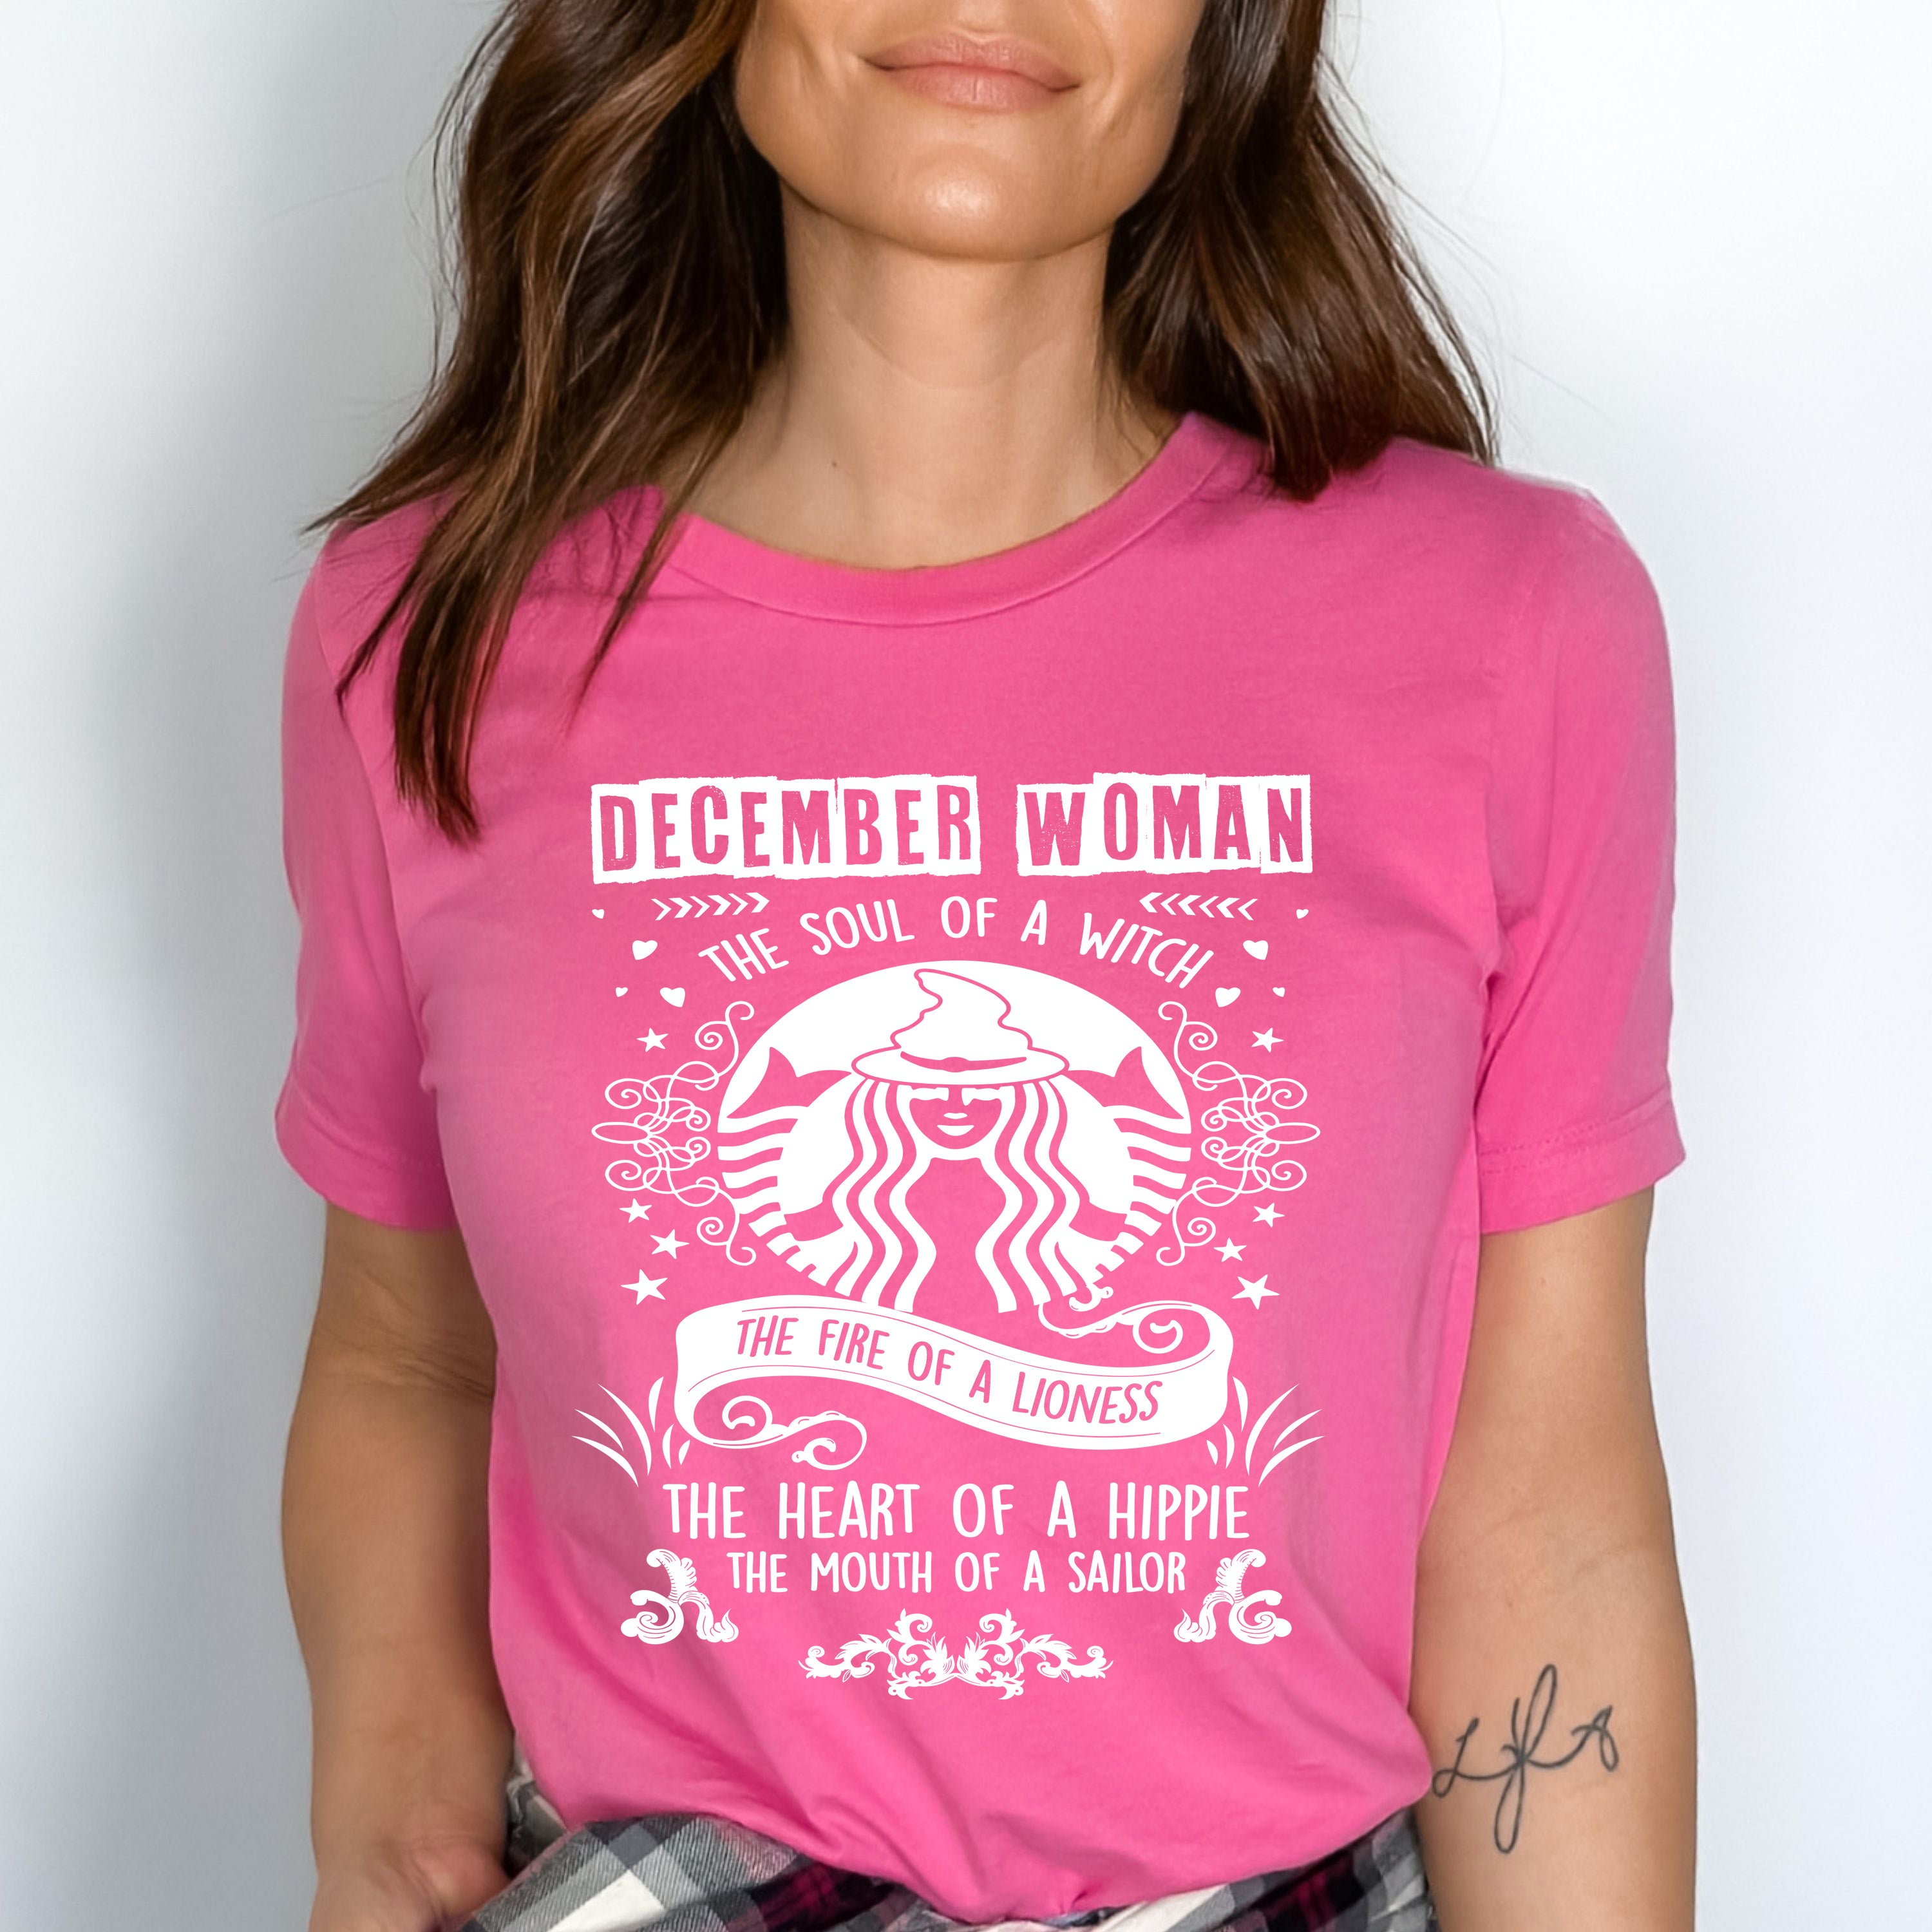 "DECEMBER WOMAN The Soul Of A Witch The Fire Of A Lioness The Heart Of A Hippie...",T-Shirt.